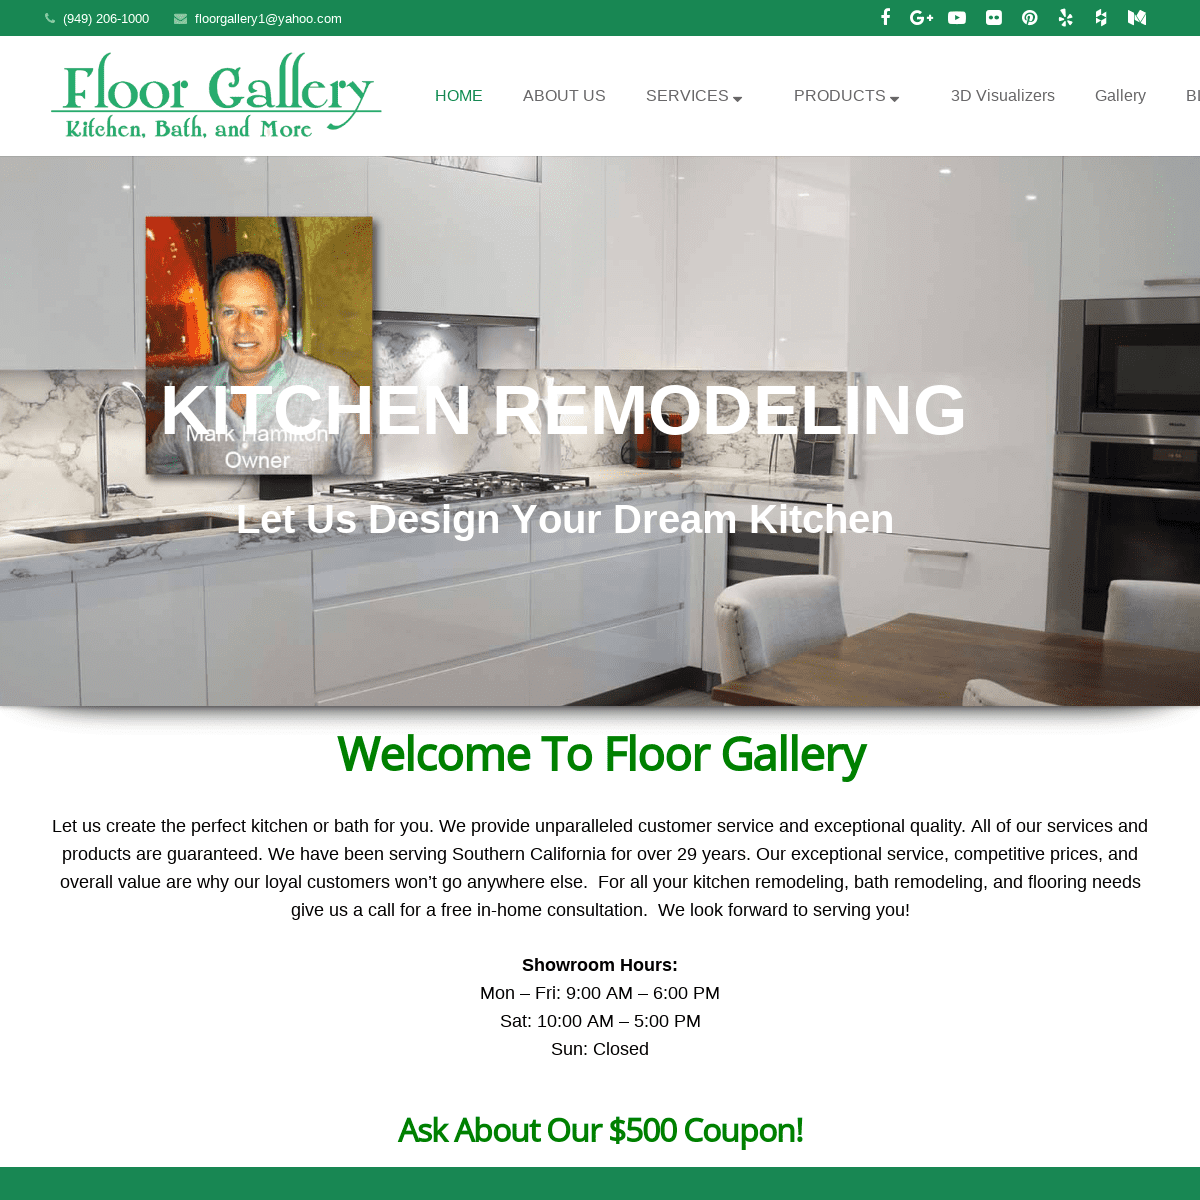 Bathroom, Kitchen & Home Remodeling Company Mission Viejo- Floor Gallery